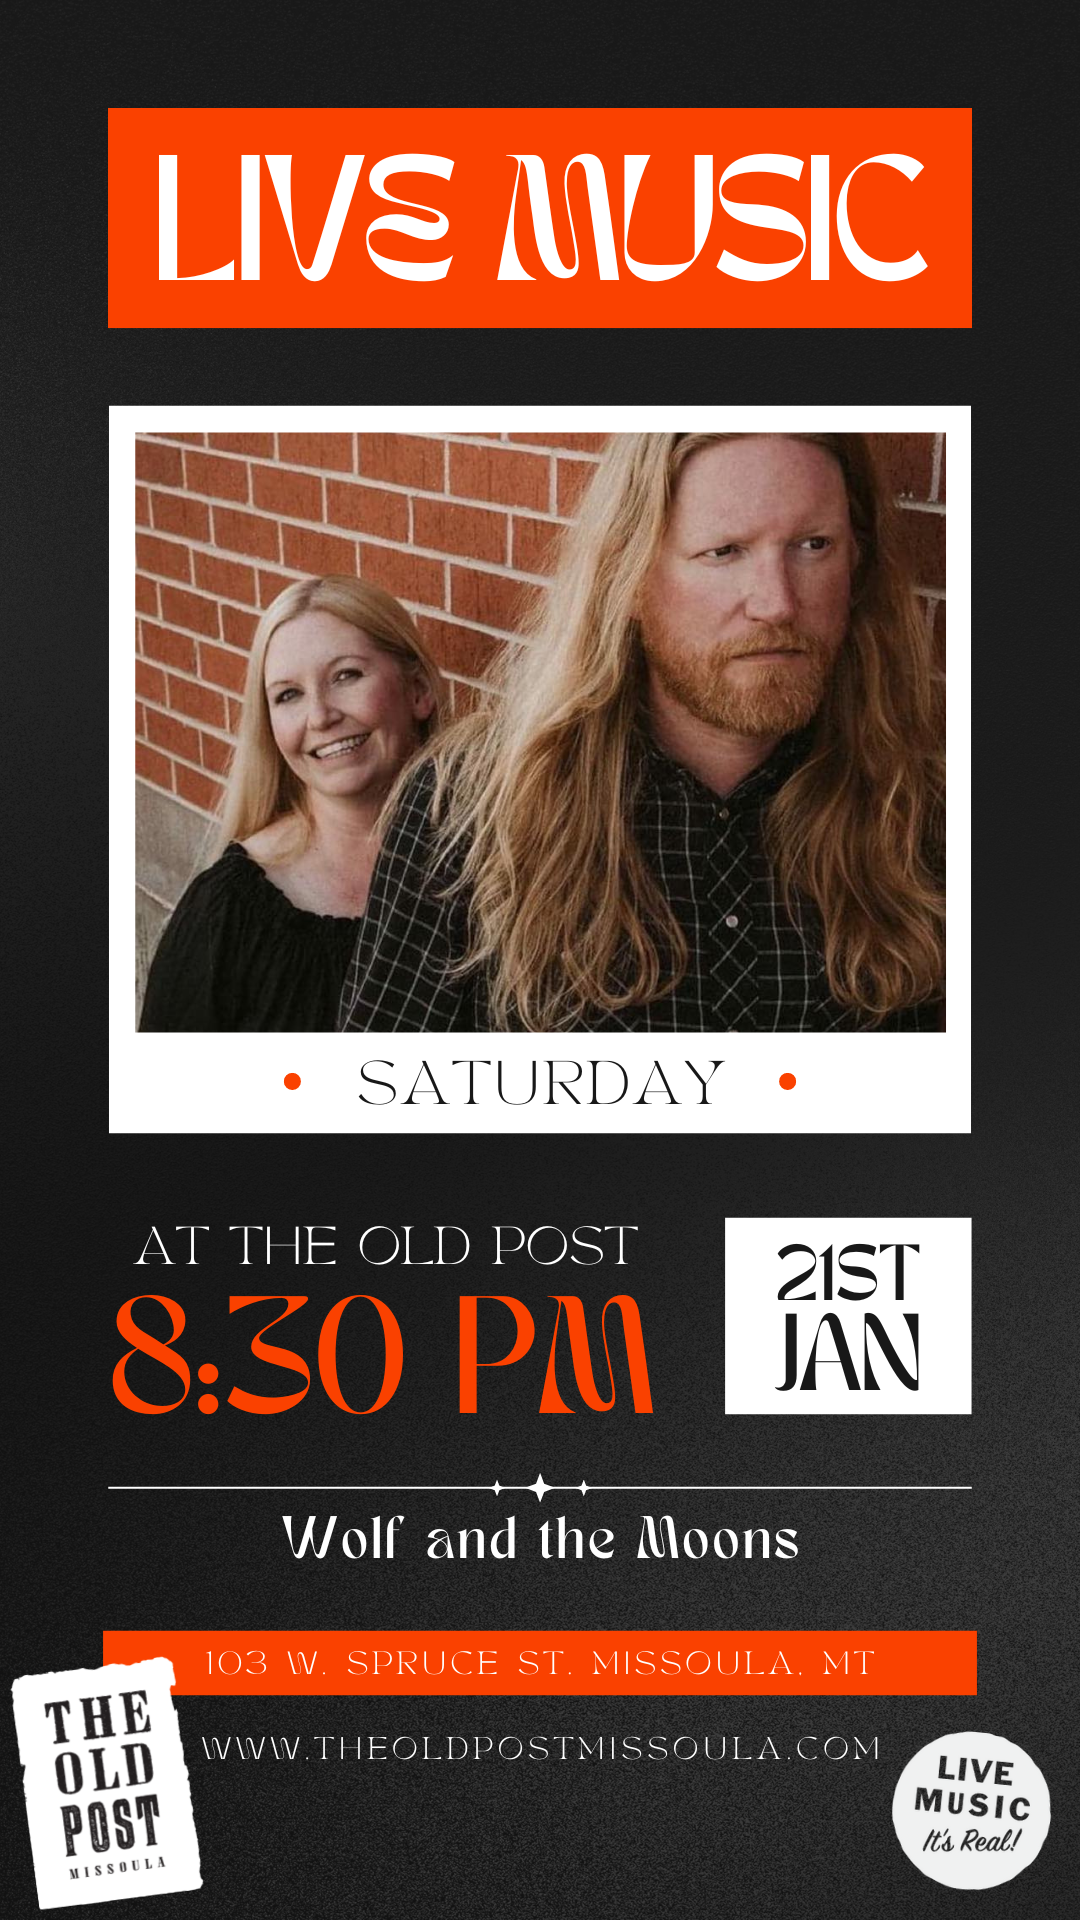 Wolf and The Moons live at The Old Post in Downtown Missoula from 8:00 pm to 10:00 pm on Saturday, January 21, 2023